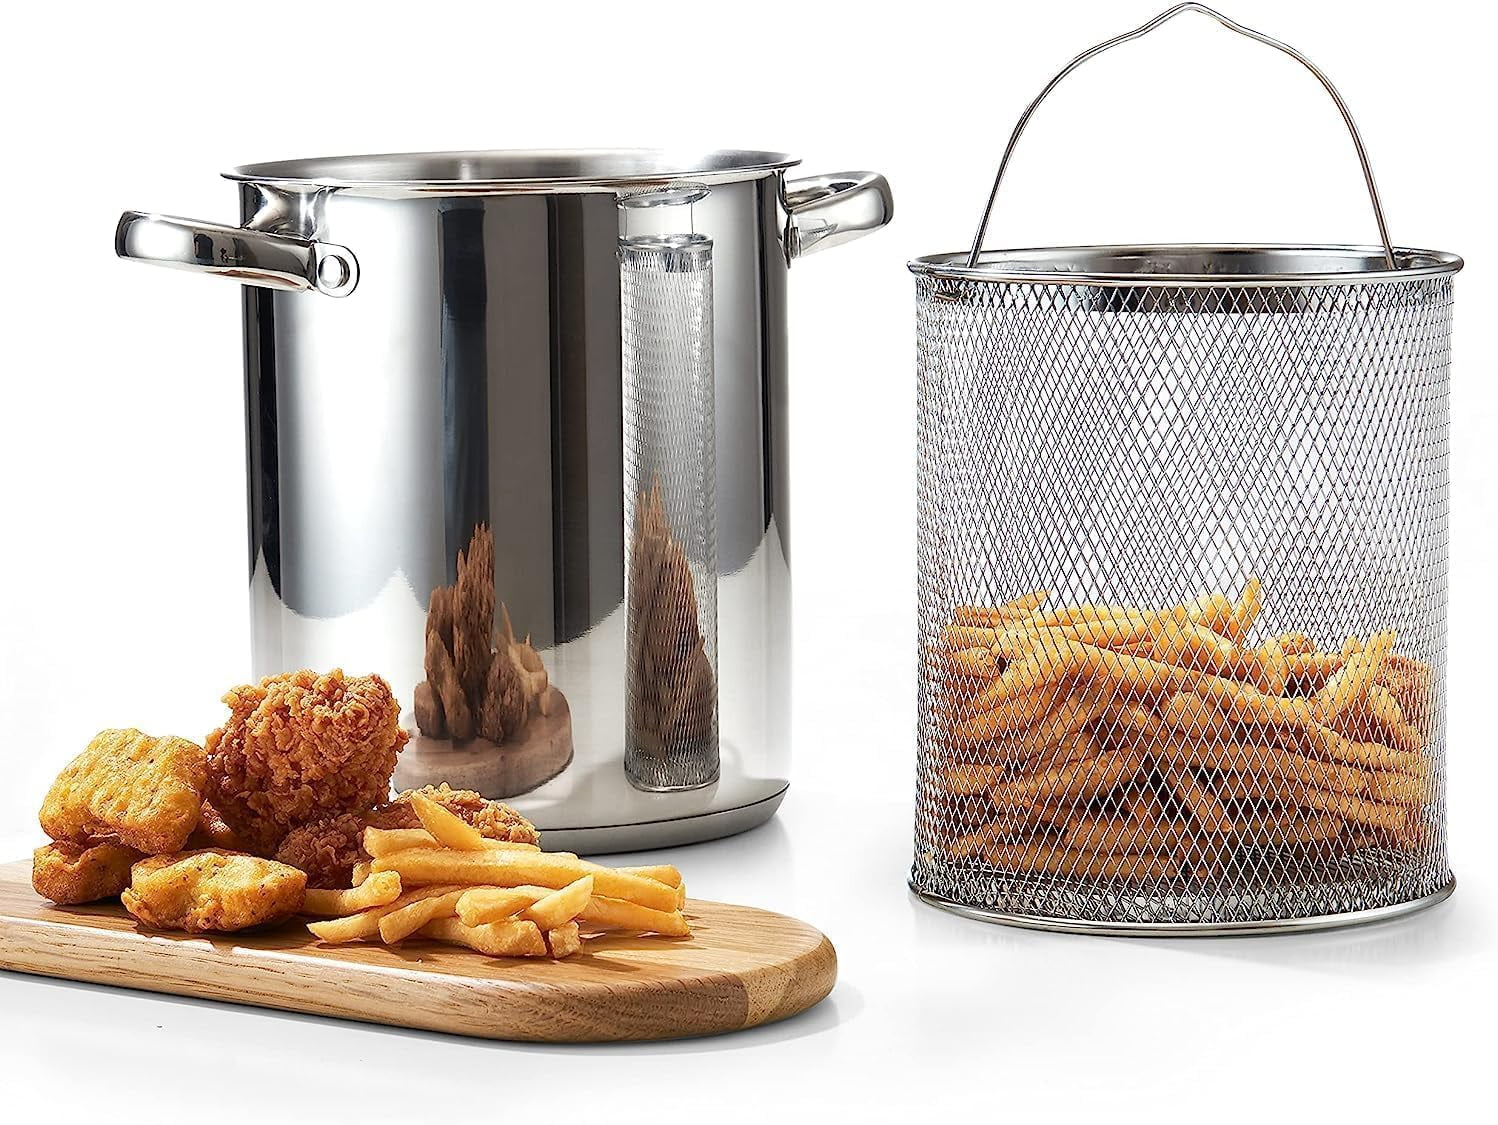 Stainless Steel Asparagus Pot with Basket Small Body Large Capacity Plus  High Small Soup Pot Fryer High Deep Pot 16cm.